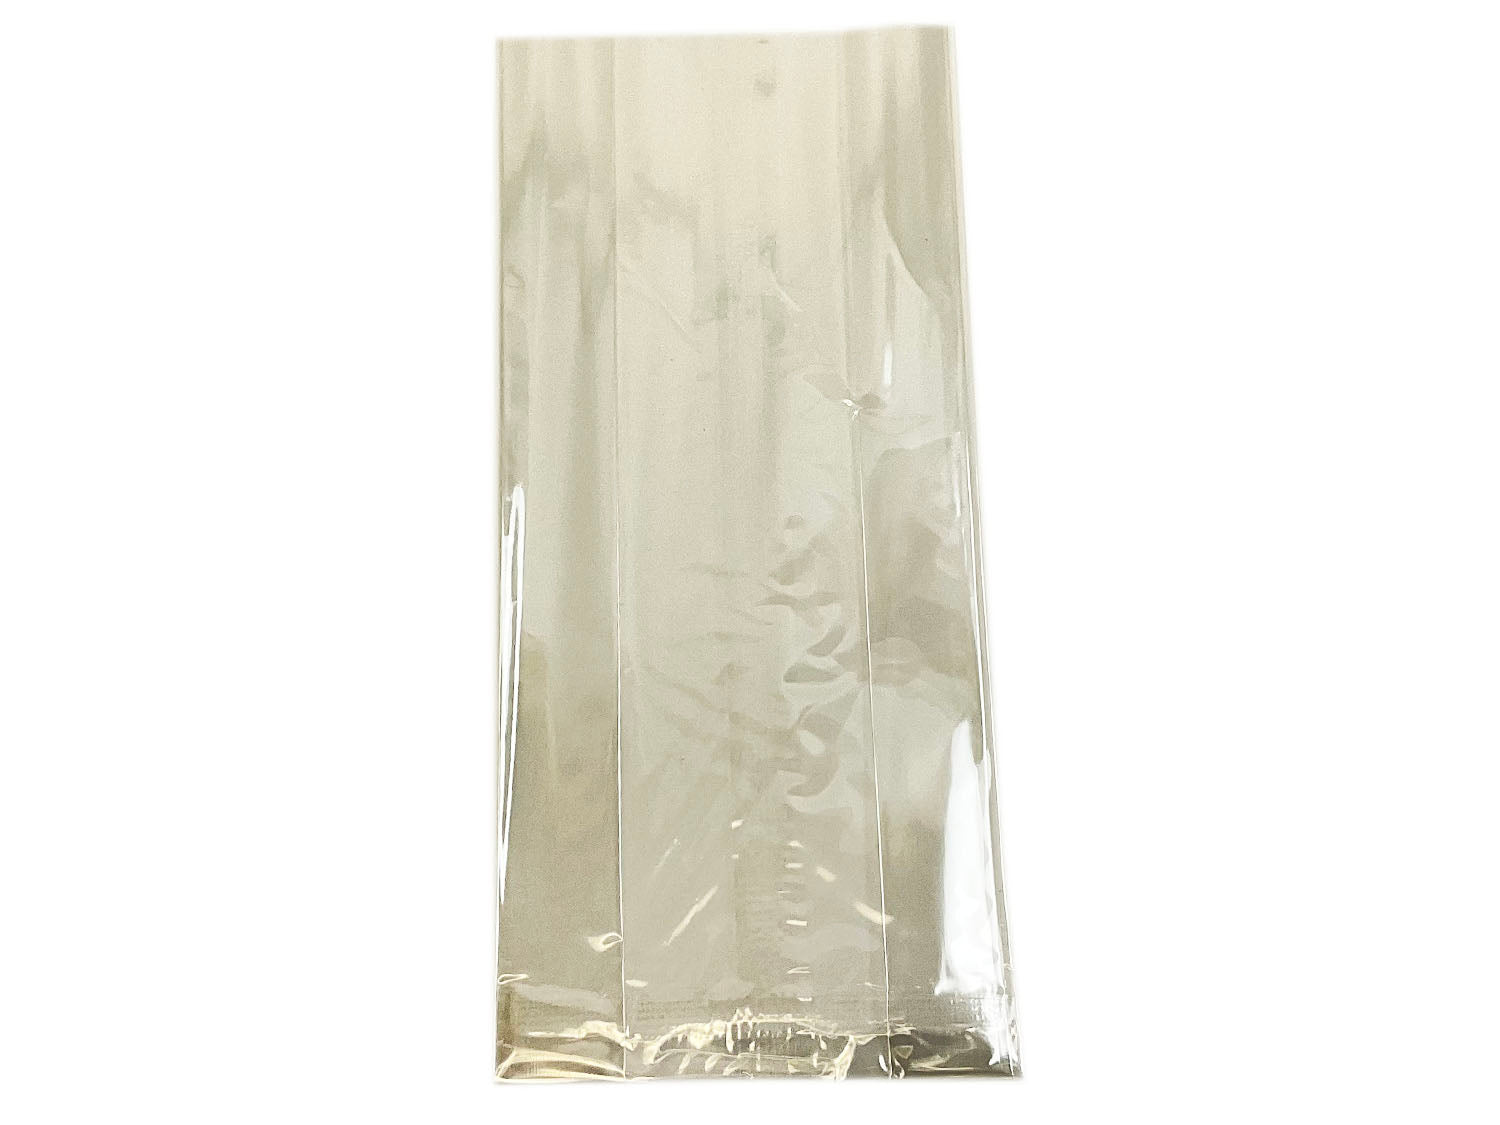 Clear Plastic Treat Party Favor Bags